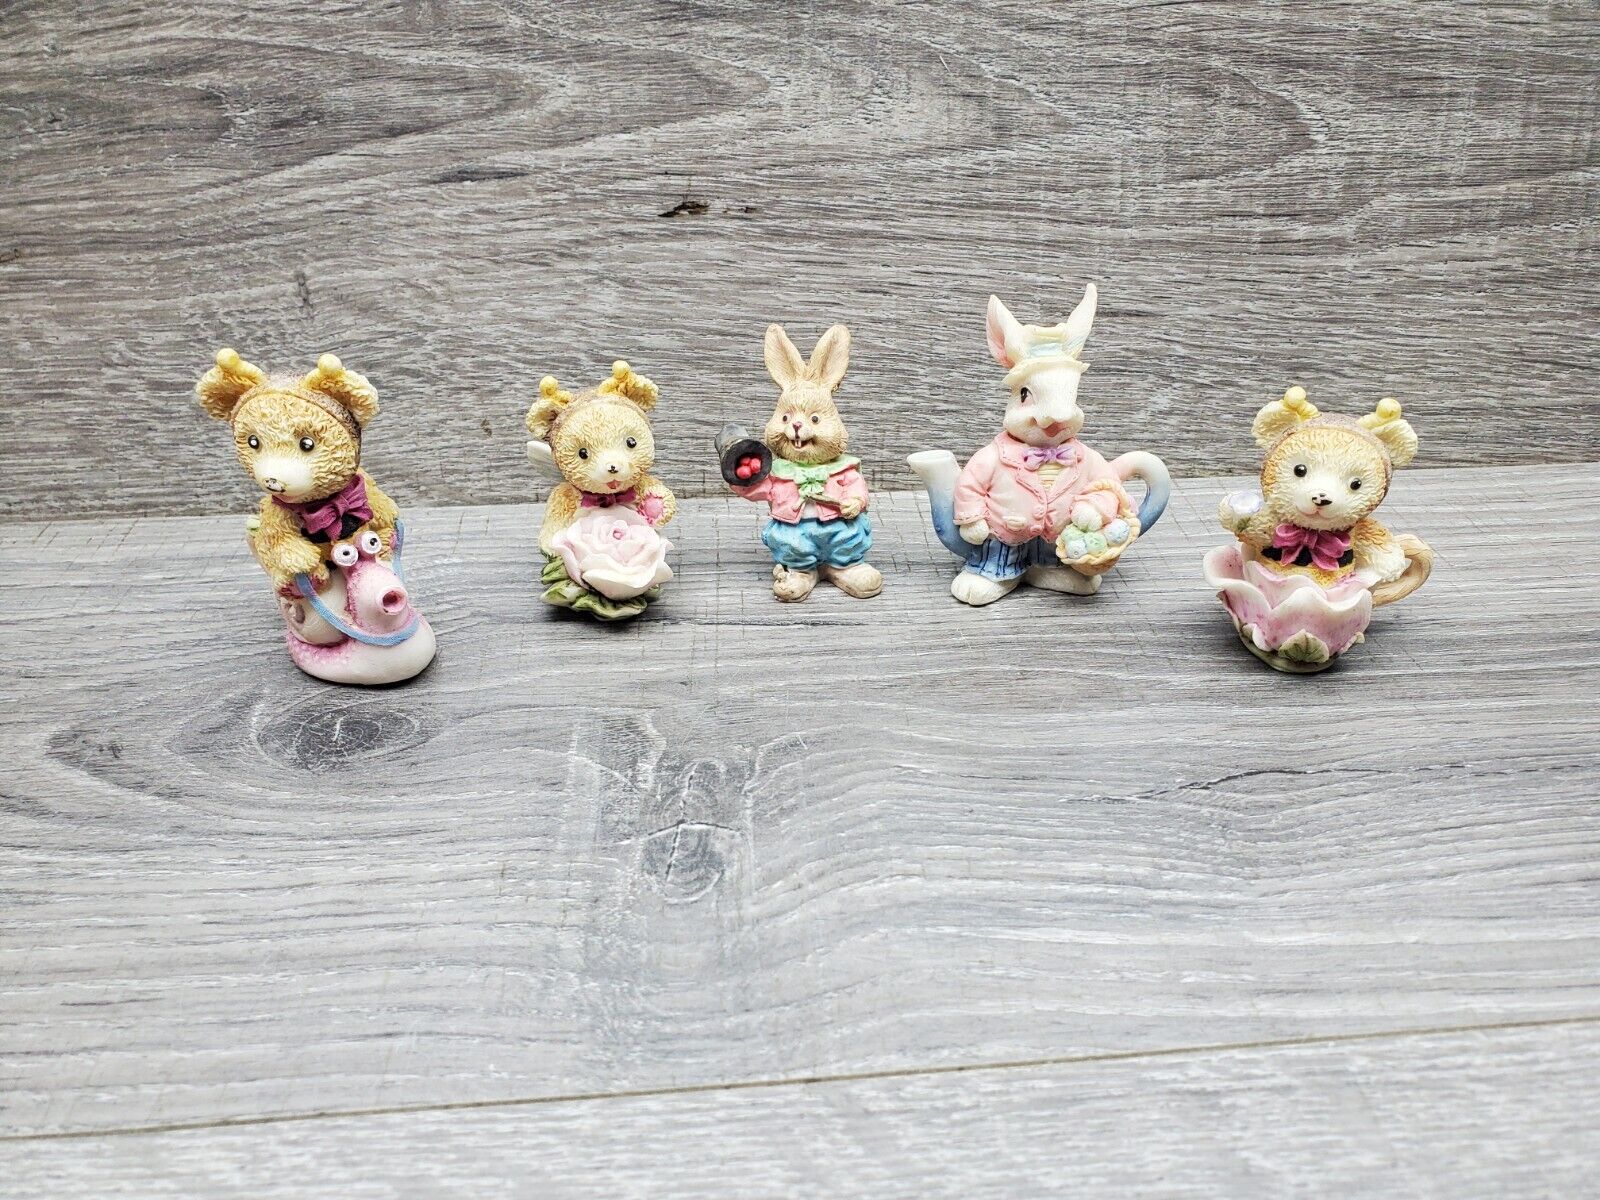 Anthropomorphic bunny & bear small Figurines lot of 5